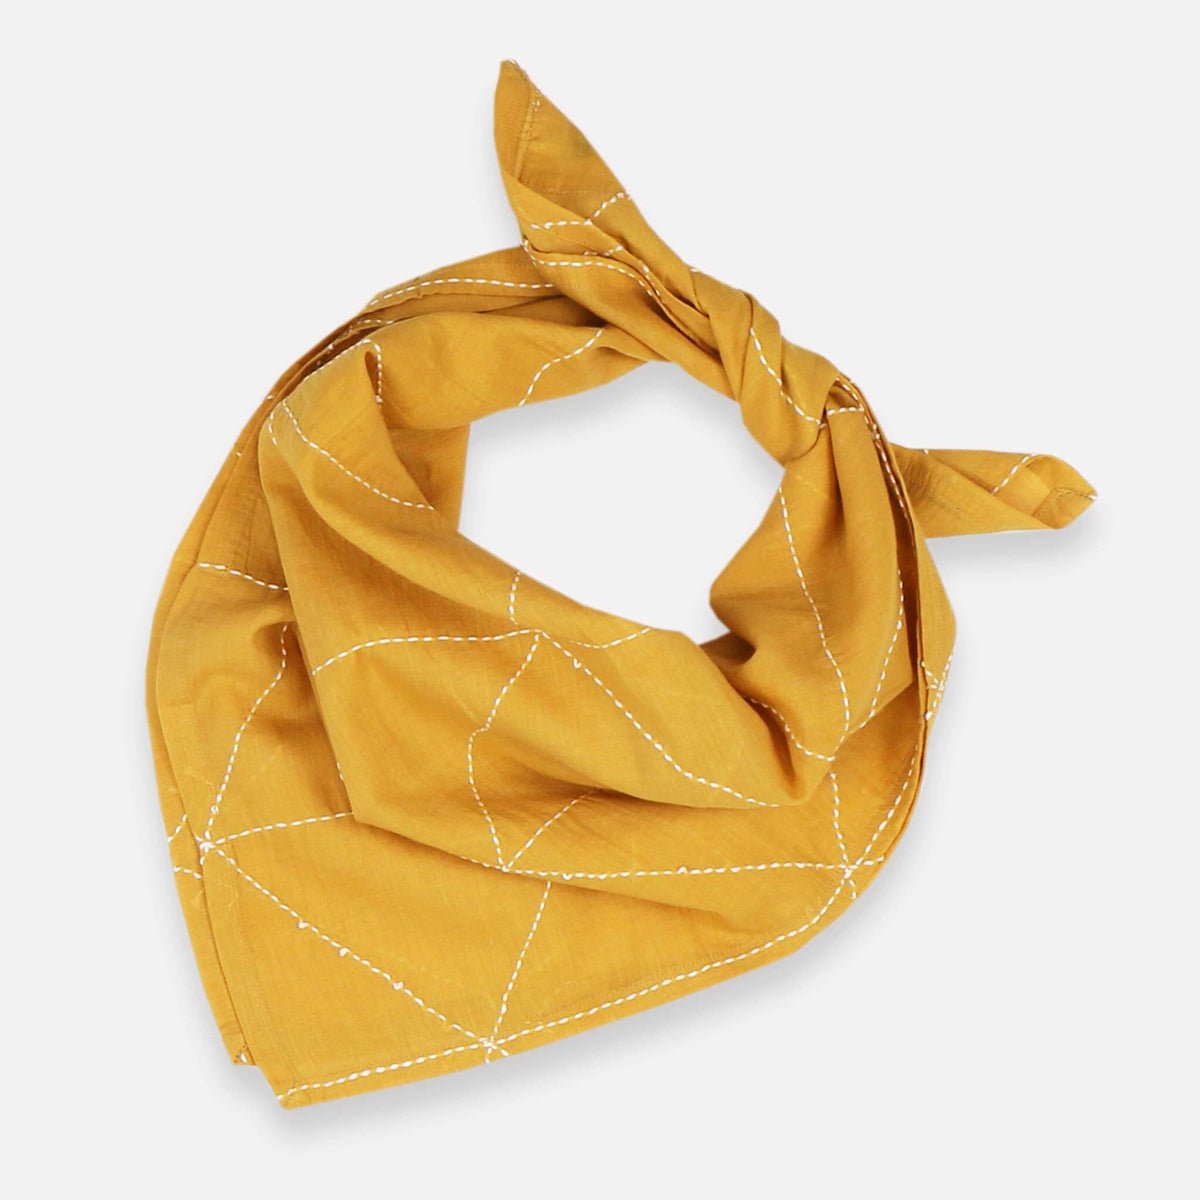 A mustard colored bandana with white stitching. The Graph Bandana in Mustard in designed by Anchal in Louisville, Kentucky and handmade in Ajmer, India.